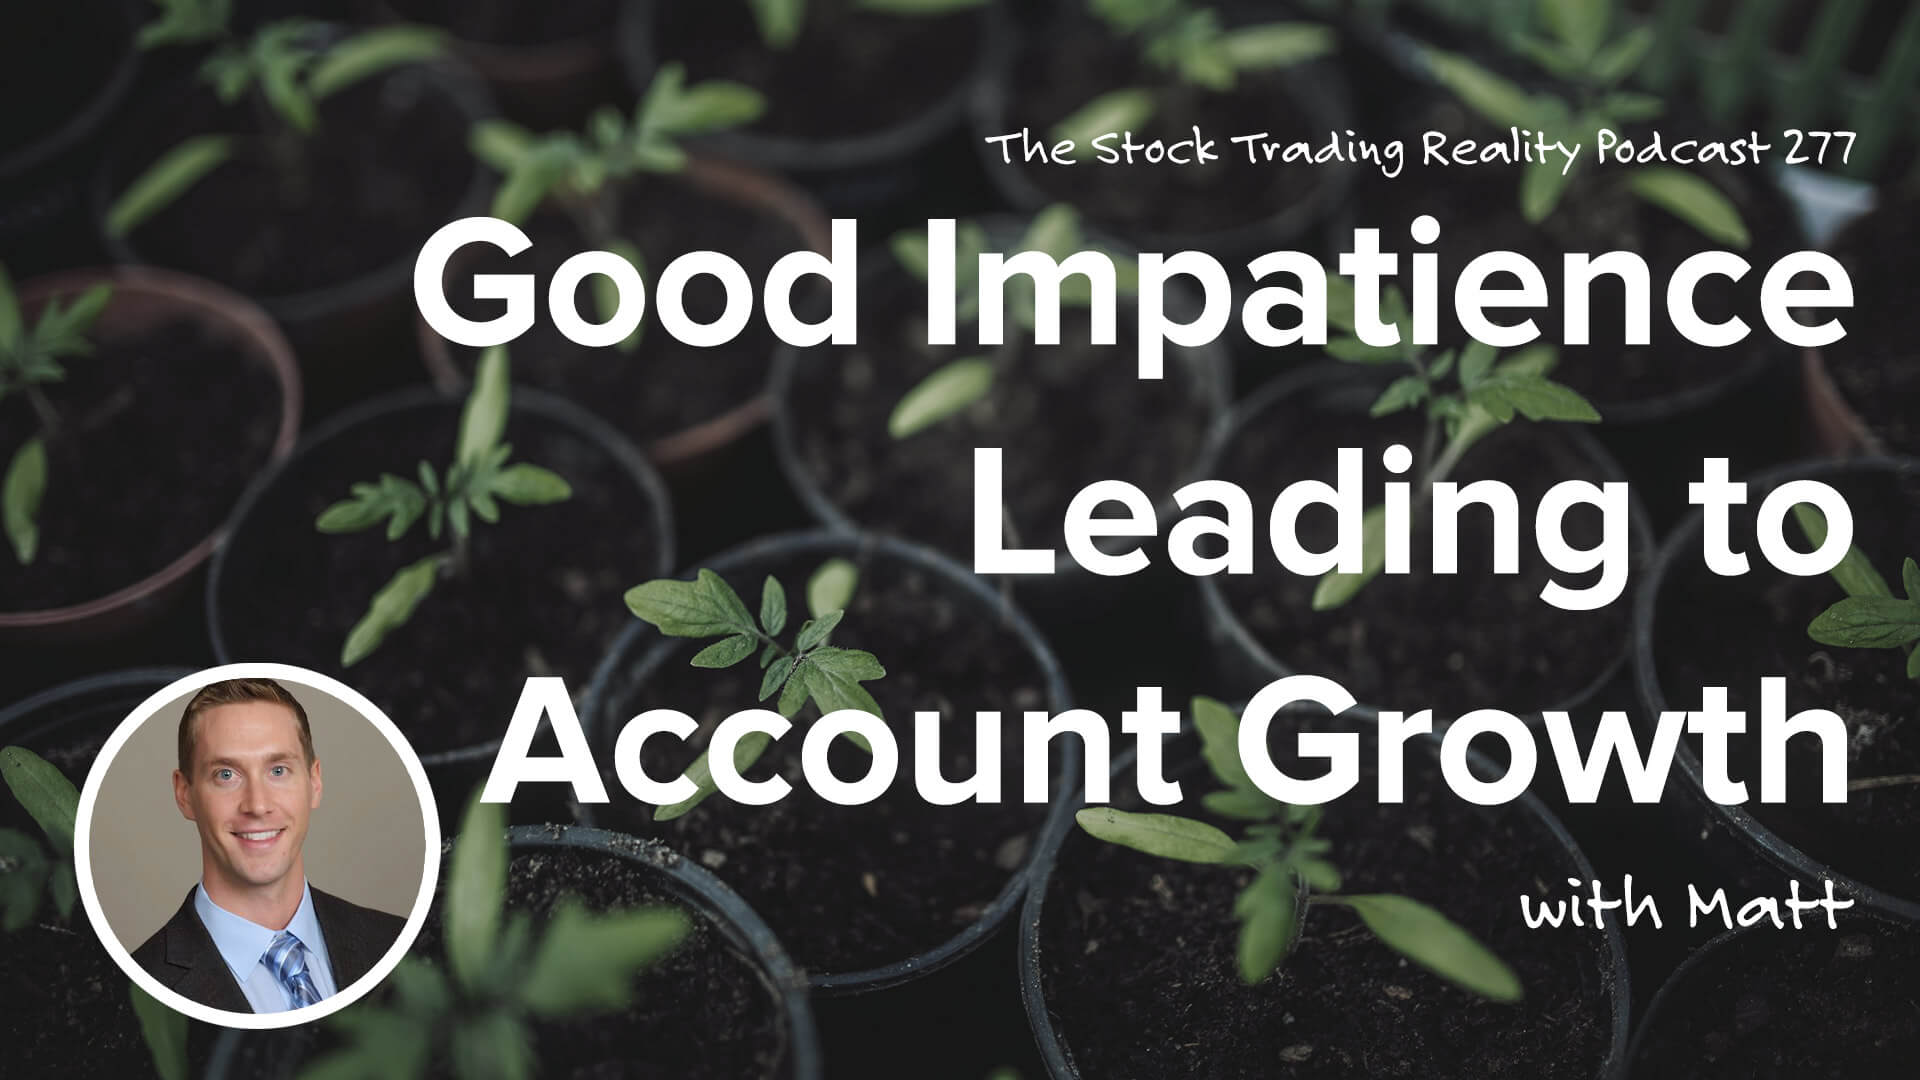 Good Impatience Leading to Account Growth | STR 277